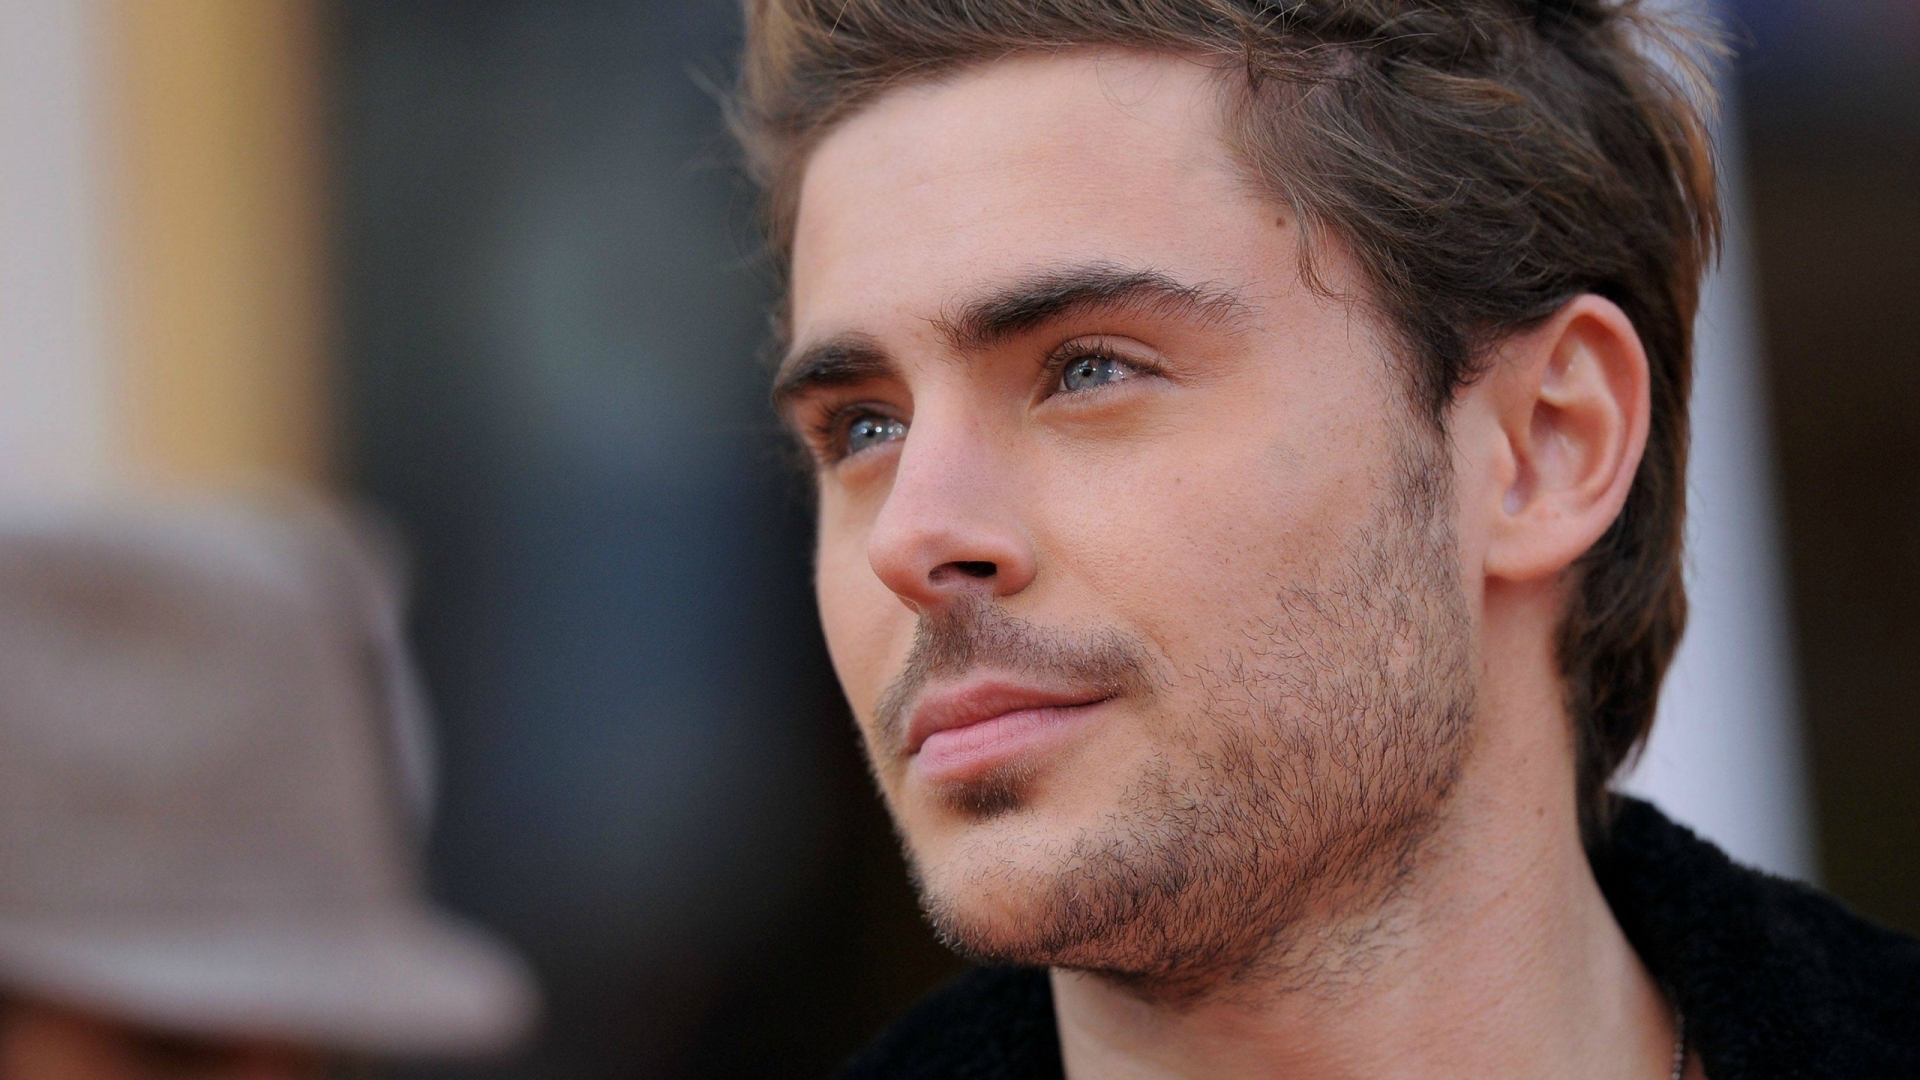 Zac Efron Actor for 1920 x 1080 HDTV 1080p resolution